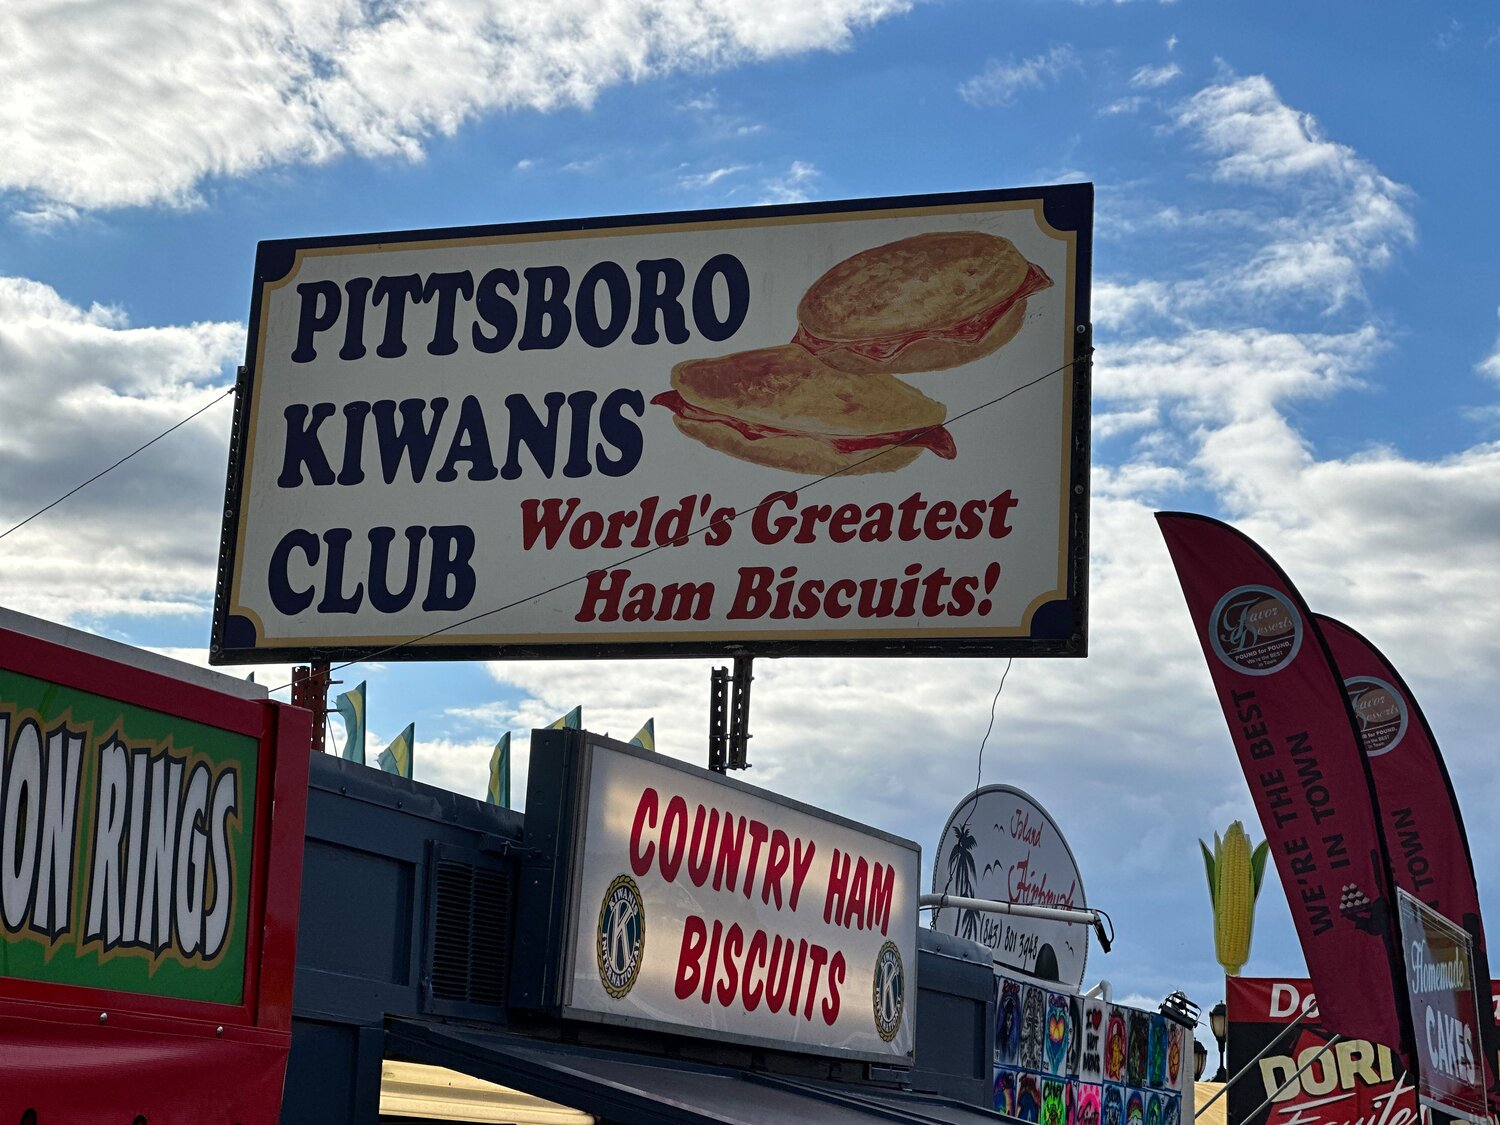 The Pittsboro Kiwanis Club sign for their famous ham biscuits at the N.C. State Fair in Raleigh on Oct. 16, 2023.